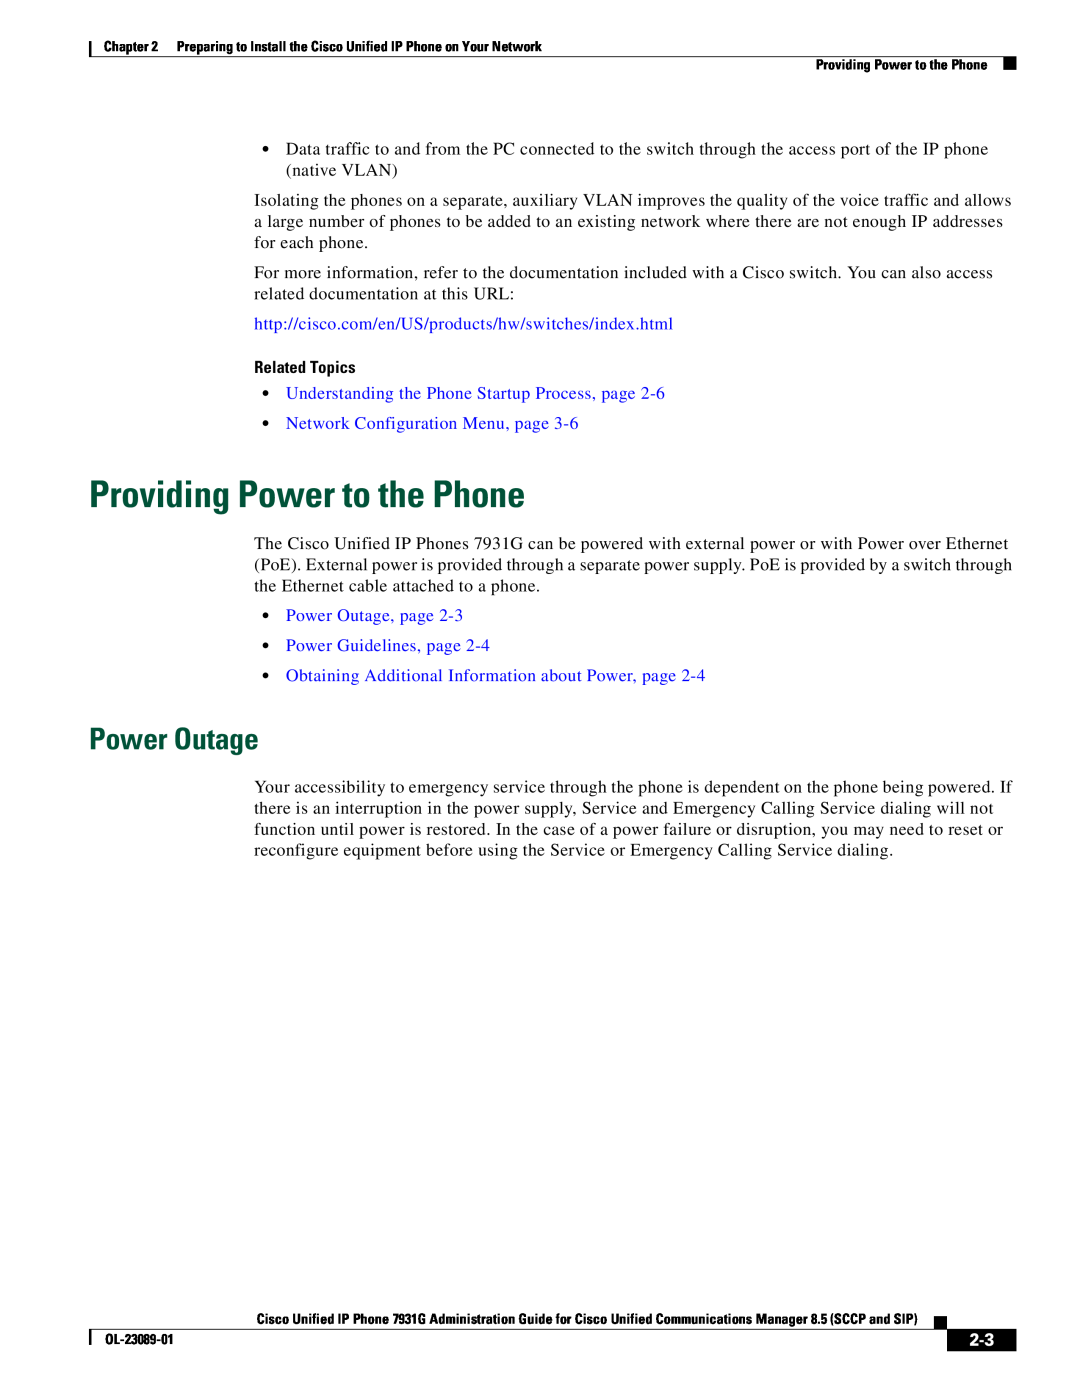 Cisco Systems OL-23089-01 Providing Power to the Phone, Power Outage, Related Topics, Network Configuration Menu, page 